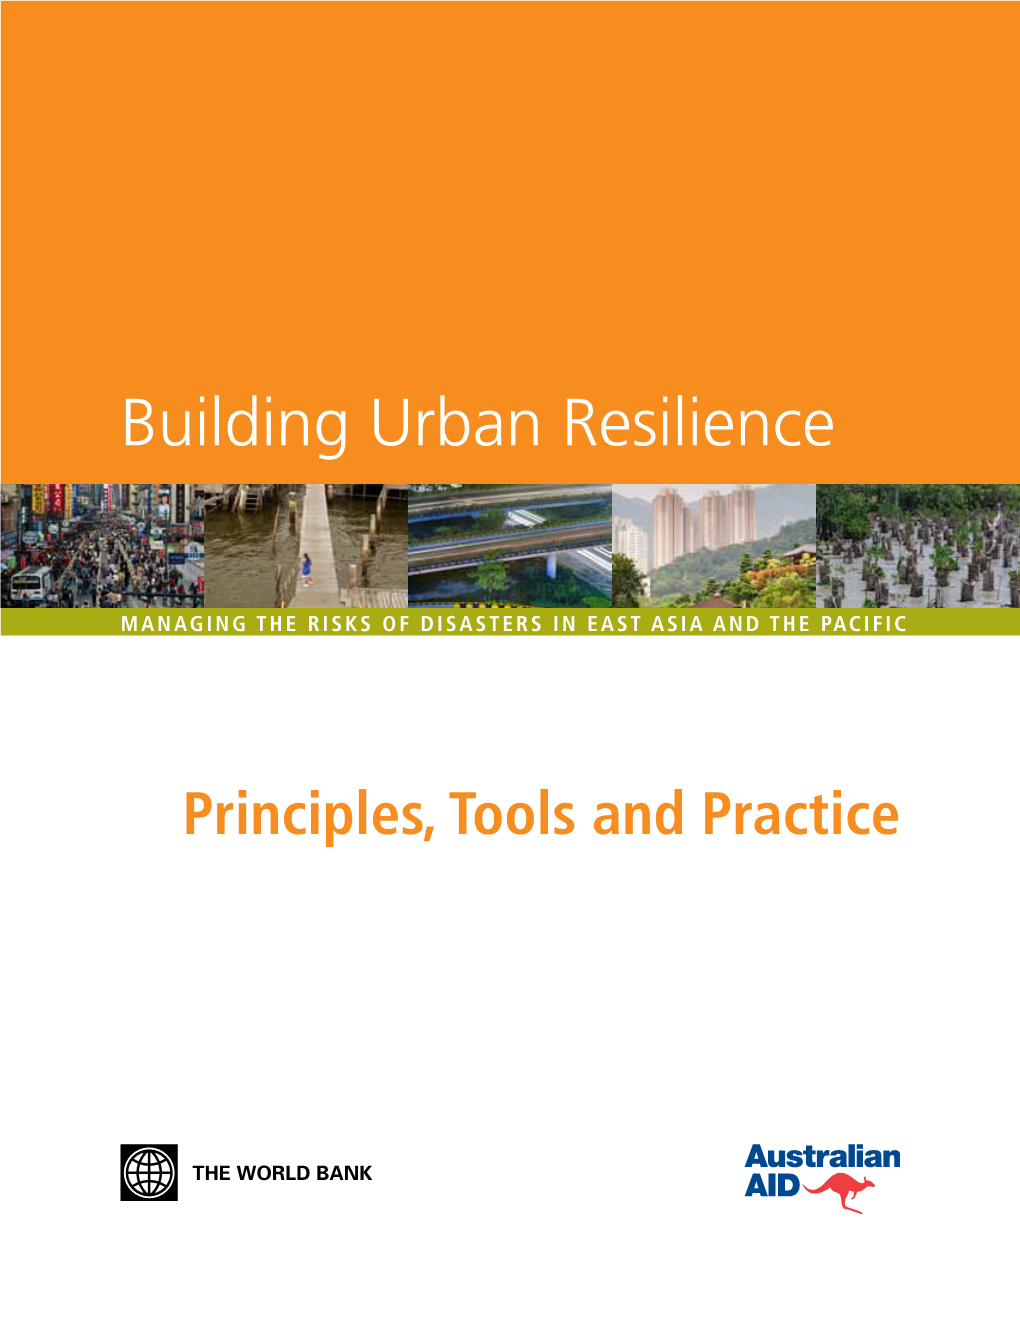 Building Urban Resilience: Principles, Tools and Practices